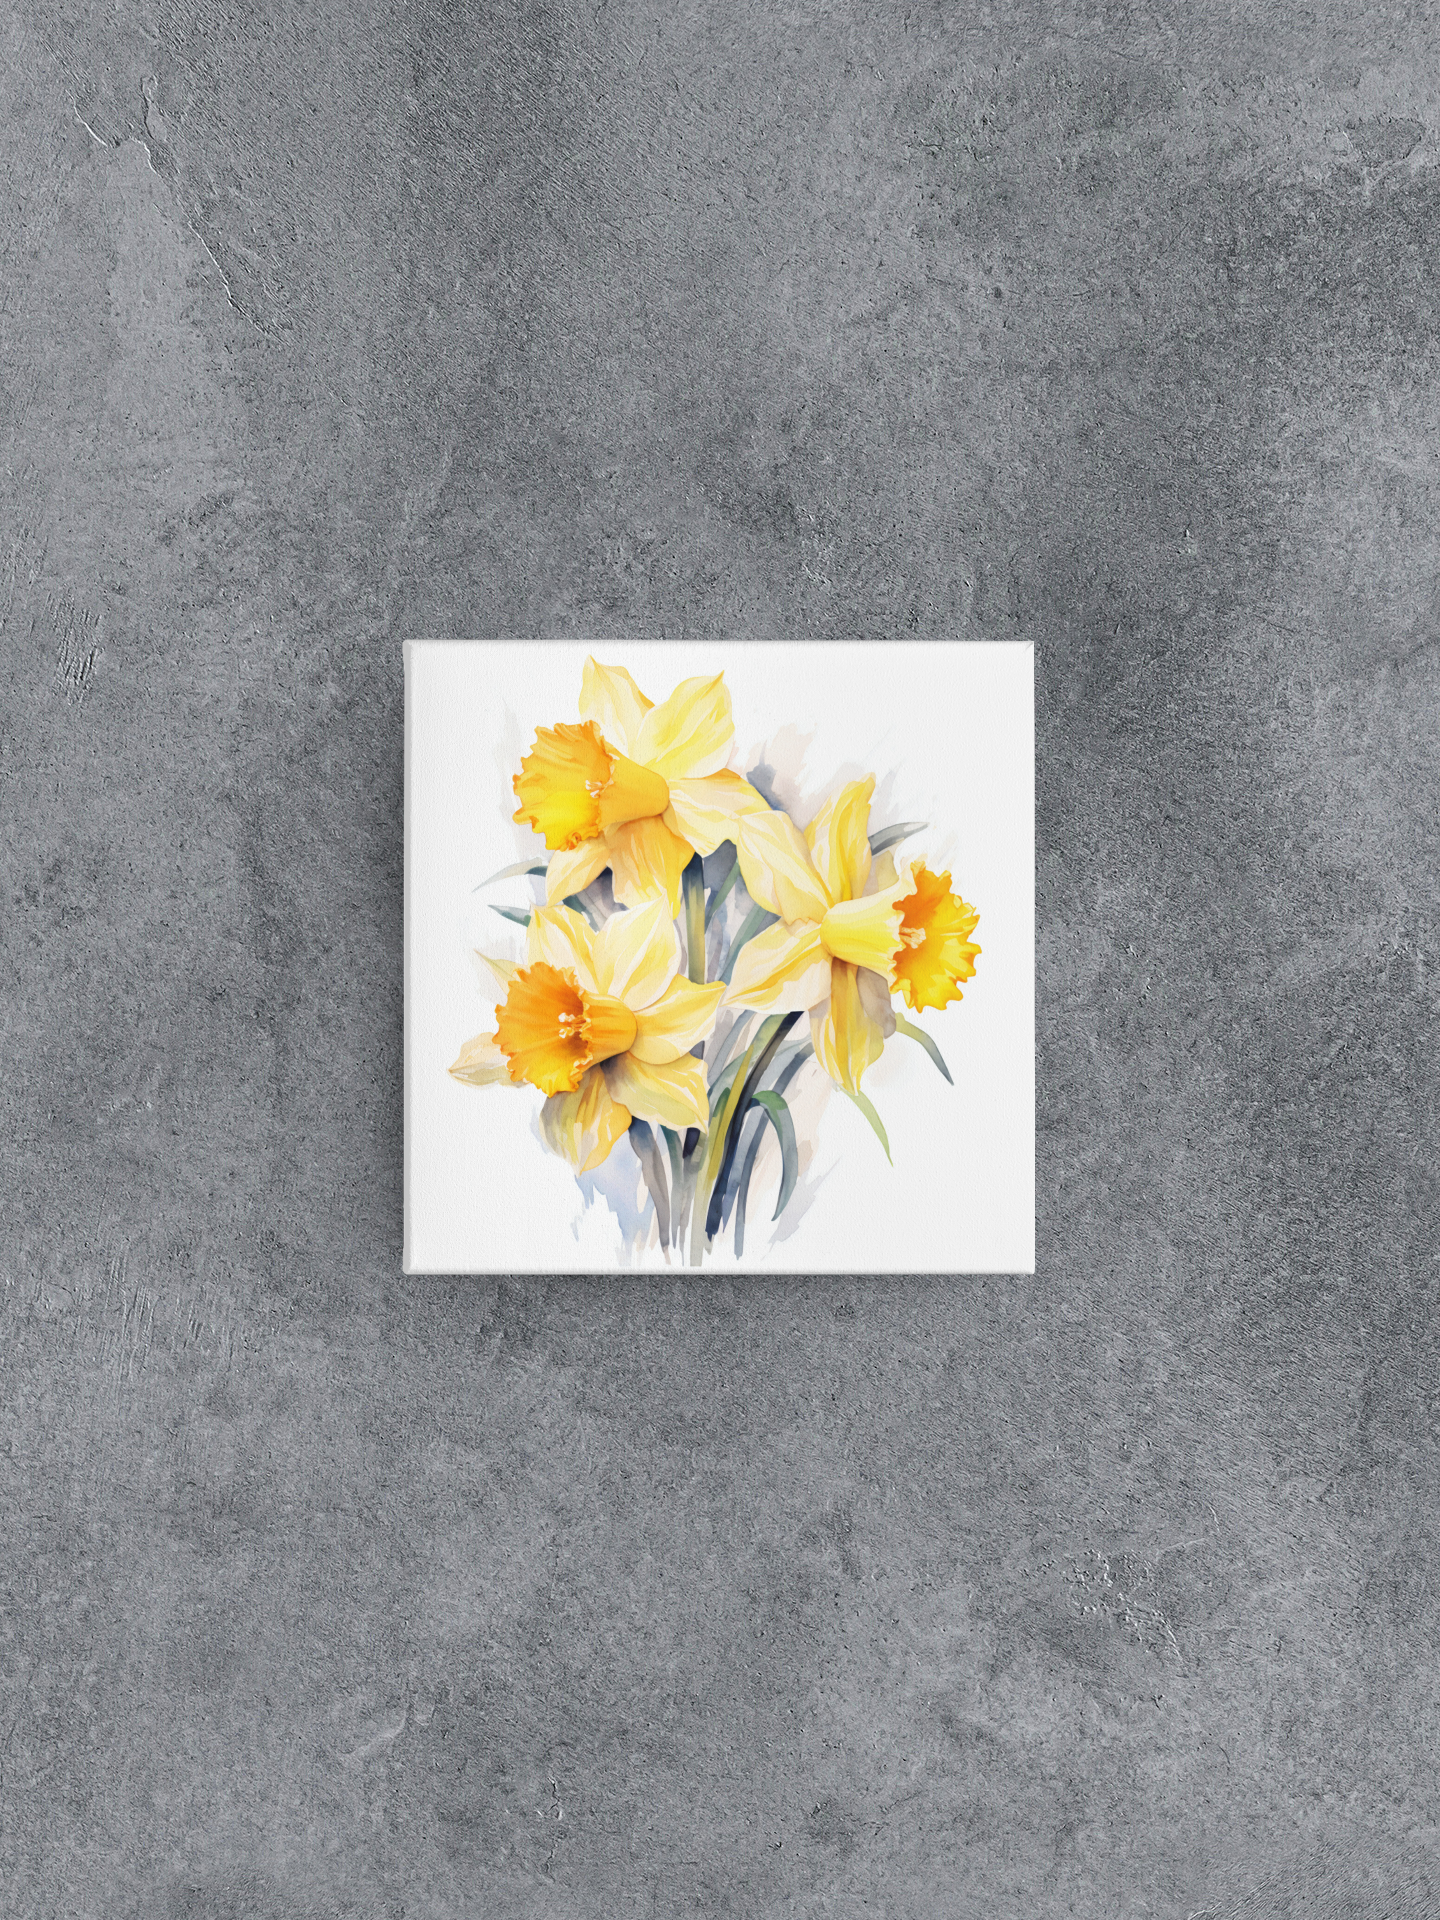 Daffodils Canvas Wall Art, Yellow Flower Watercolor Painting, Floral Home Office Decor, Nature Housewarming Gift, Gift for Gardeners